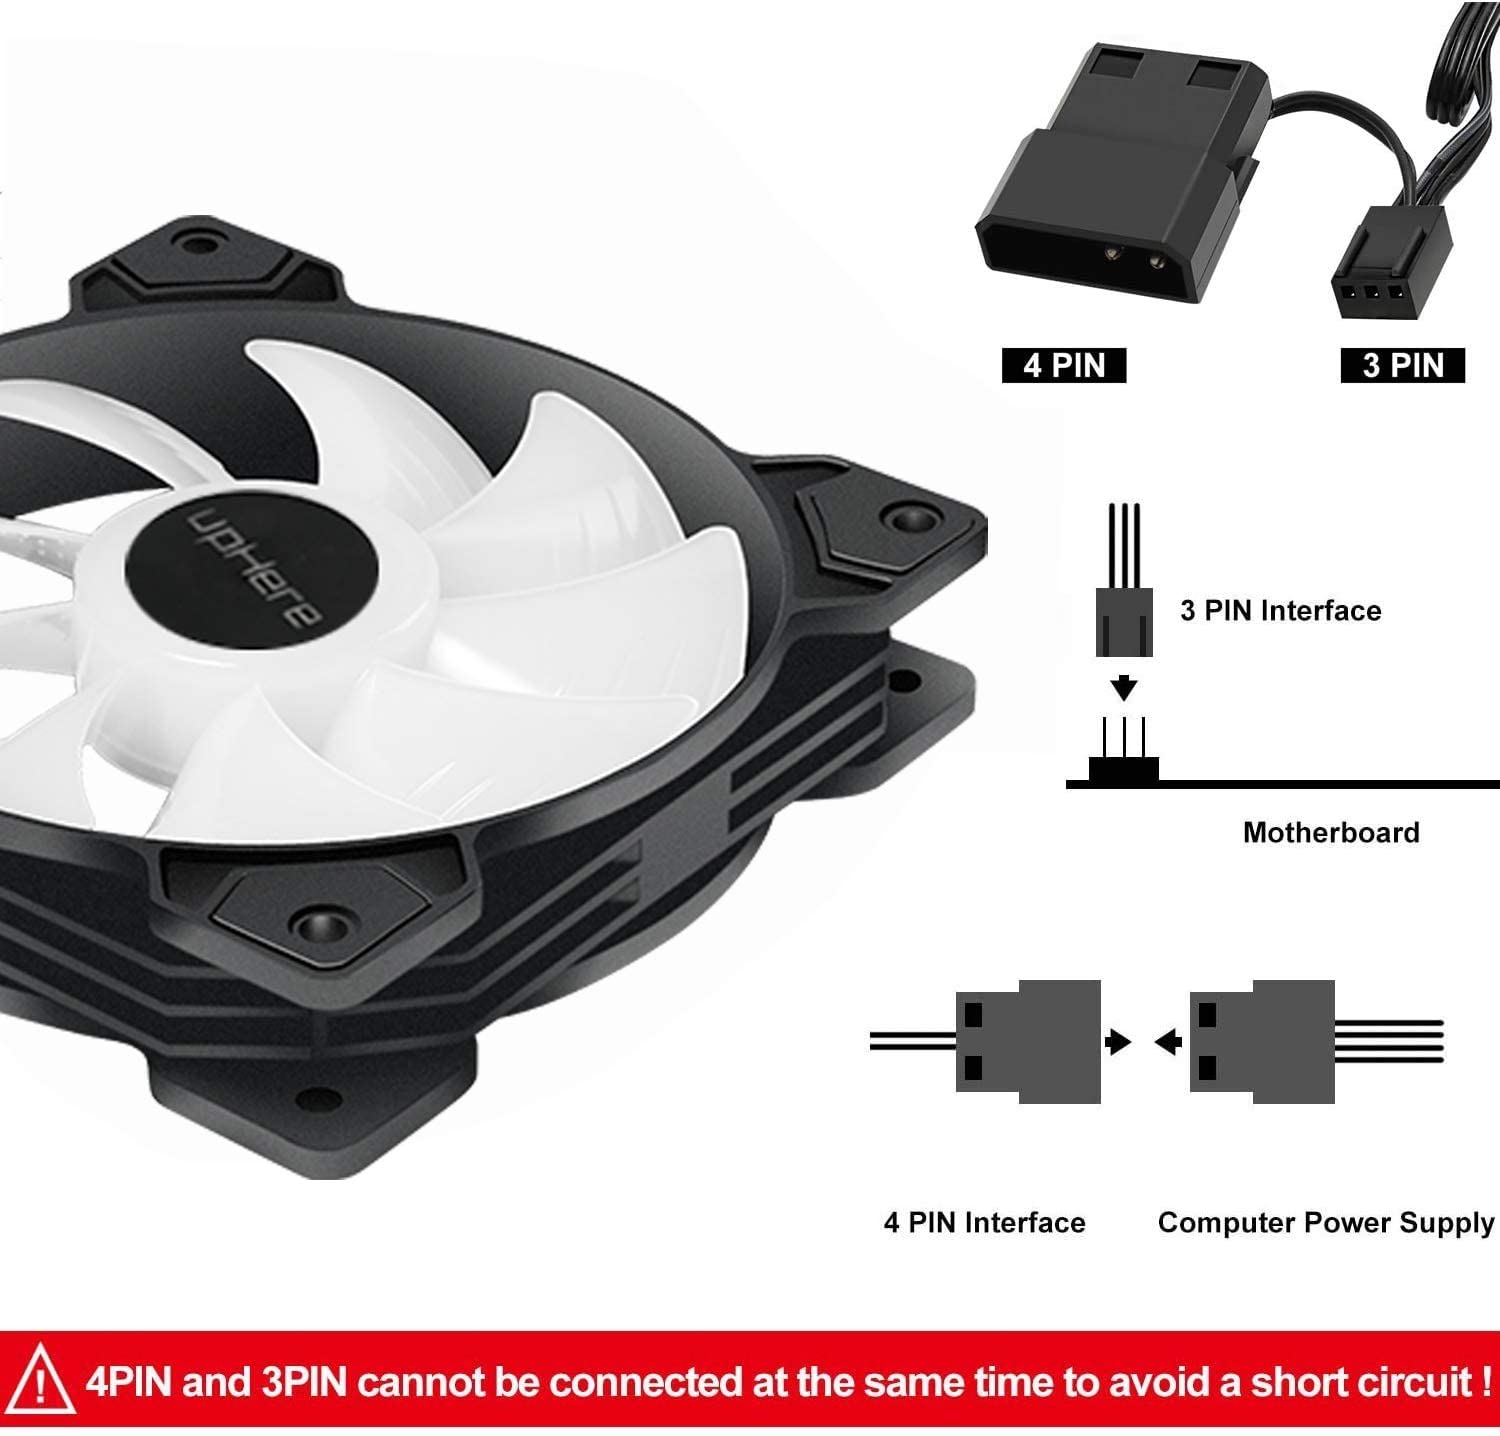 upHere 120mm 3-Pin High Airflow Long Life White LED Case Fan for PC Cases.